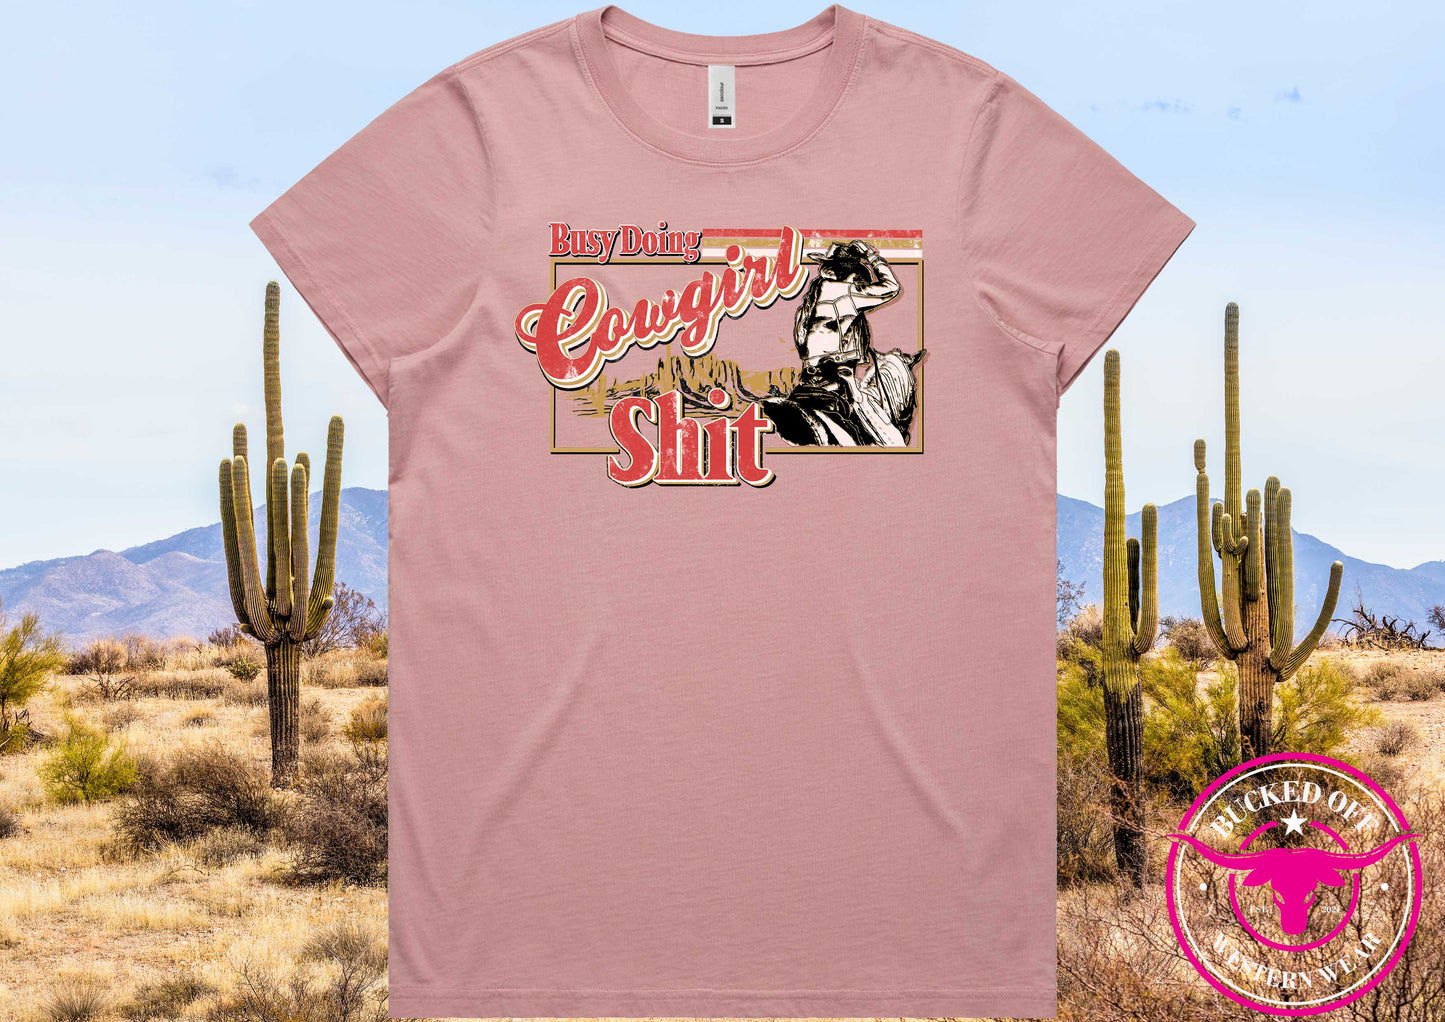 Busy doin' Cowgirl sh*t Tee's